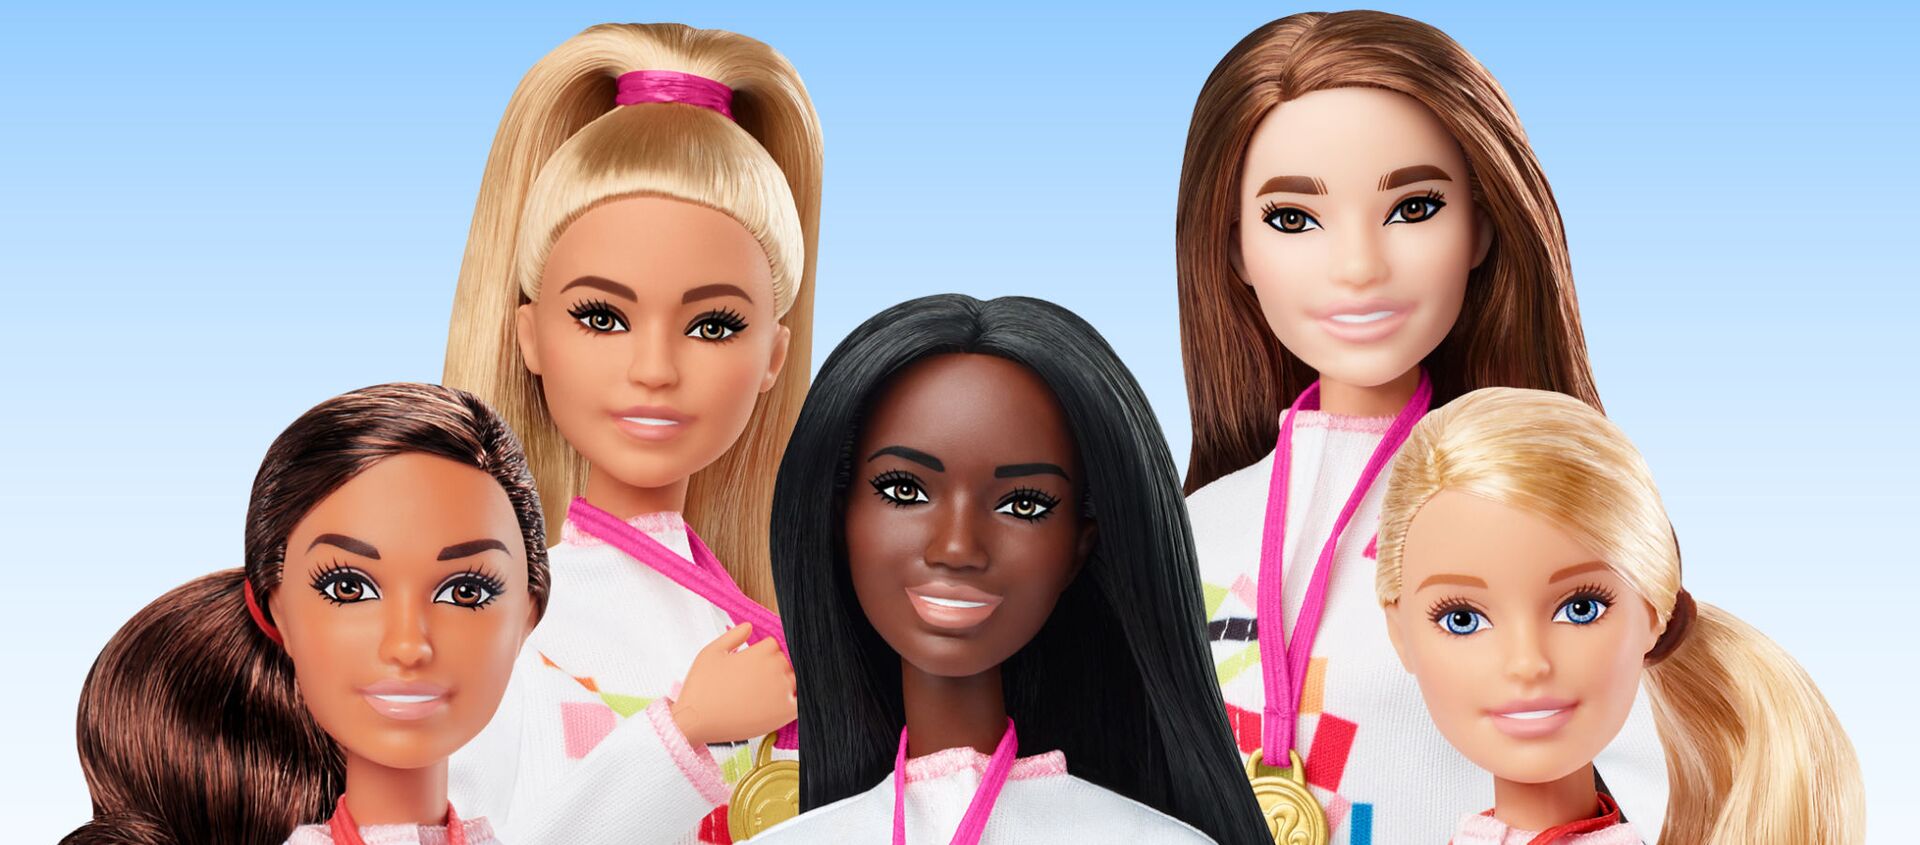 Barbie criticized for allegedly leaving out Asians in 'inclusive' Tokyo 2020 collection - 俄罗斯卫星通讯社, 1920, 11.08.2021